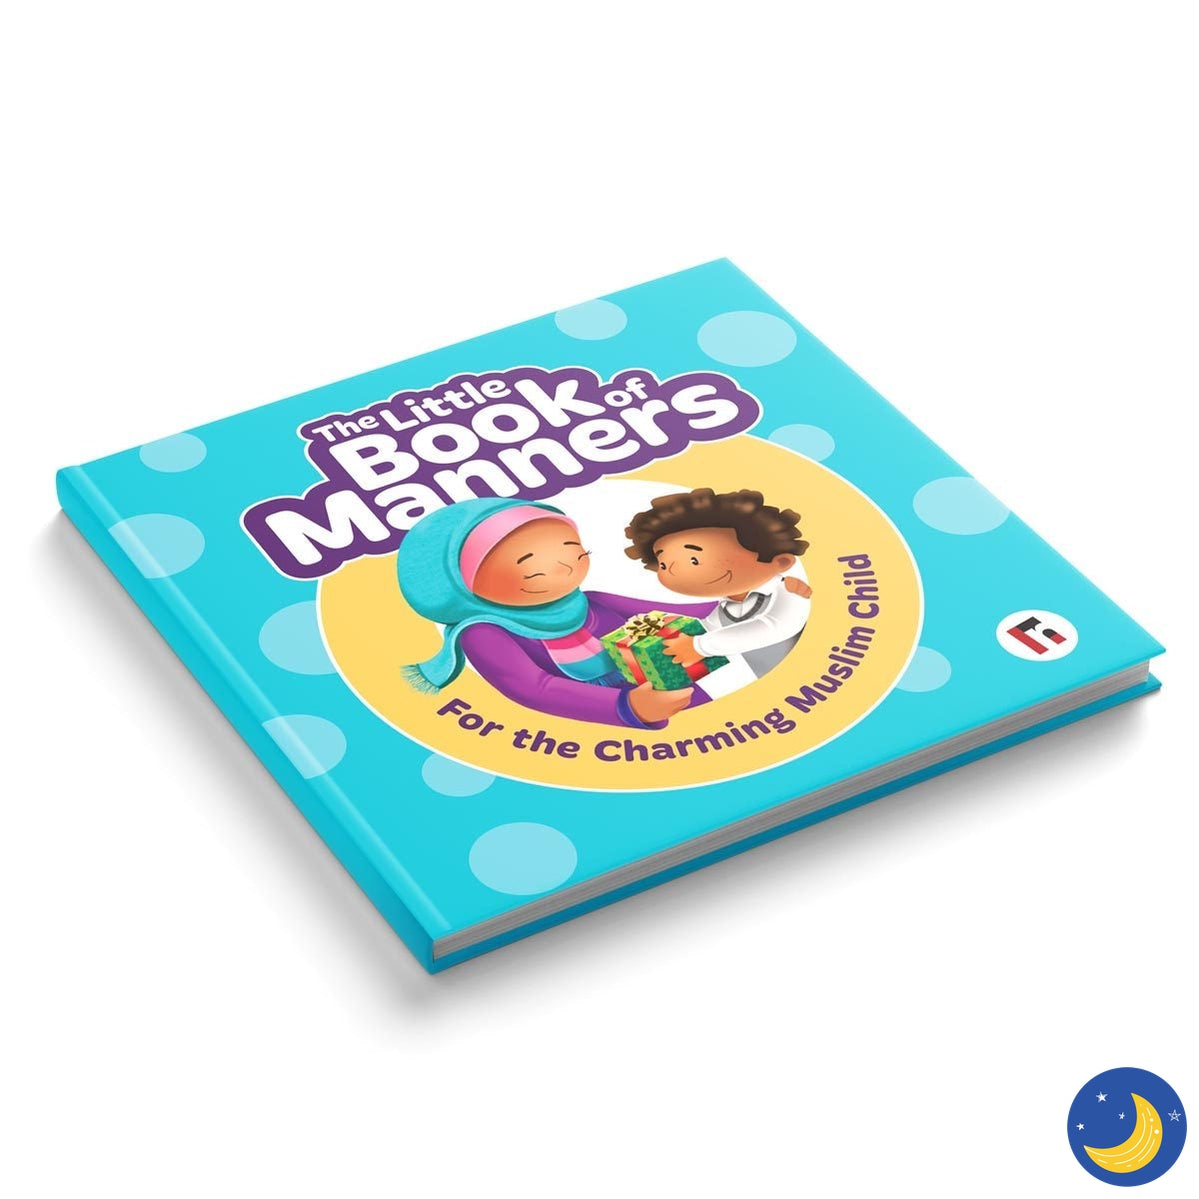 The Box Of Manners - Best Learning Toys | Crescent Moon Store